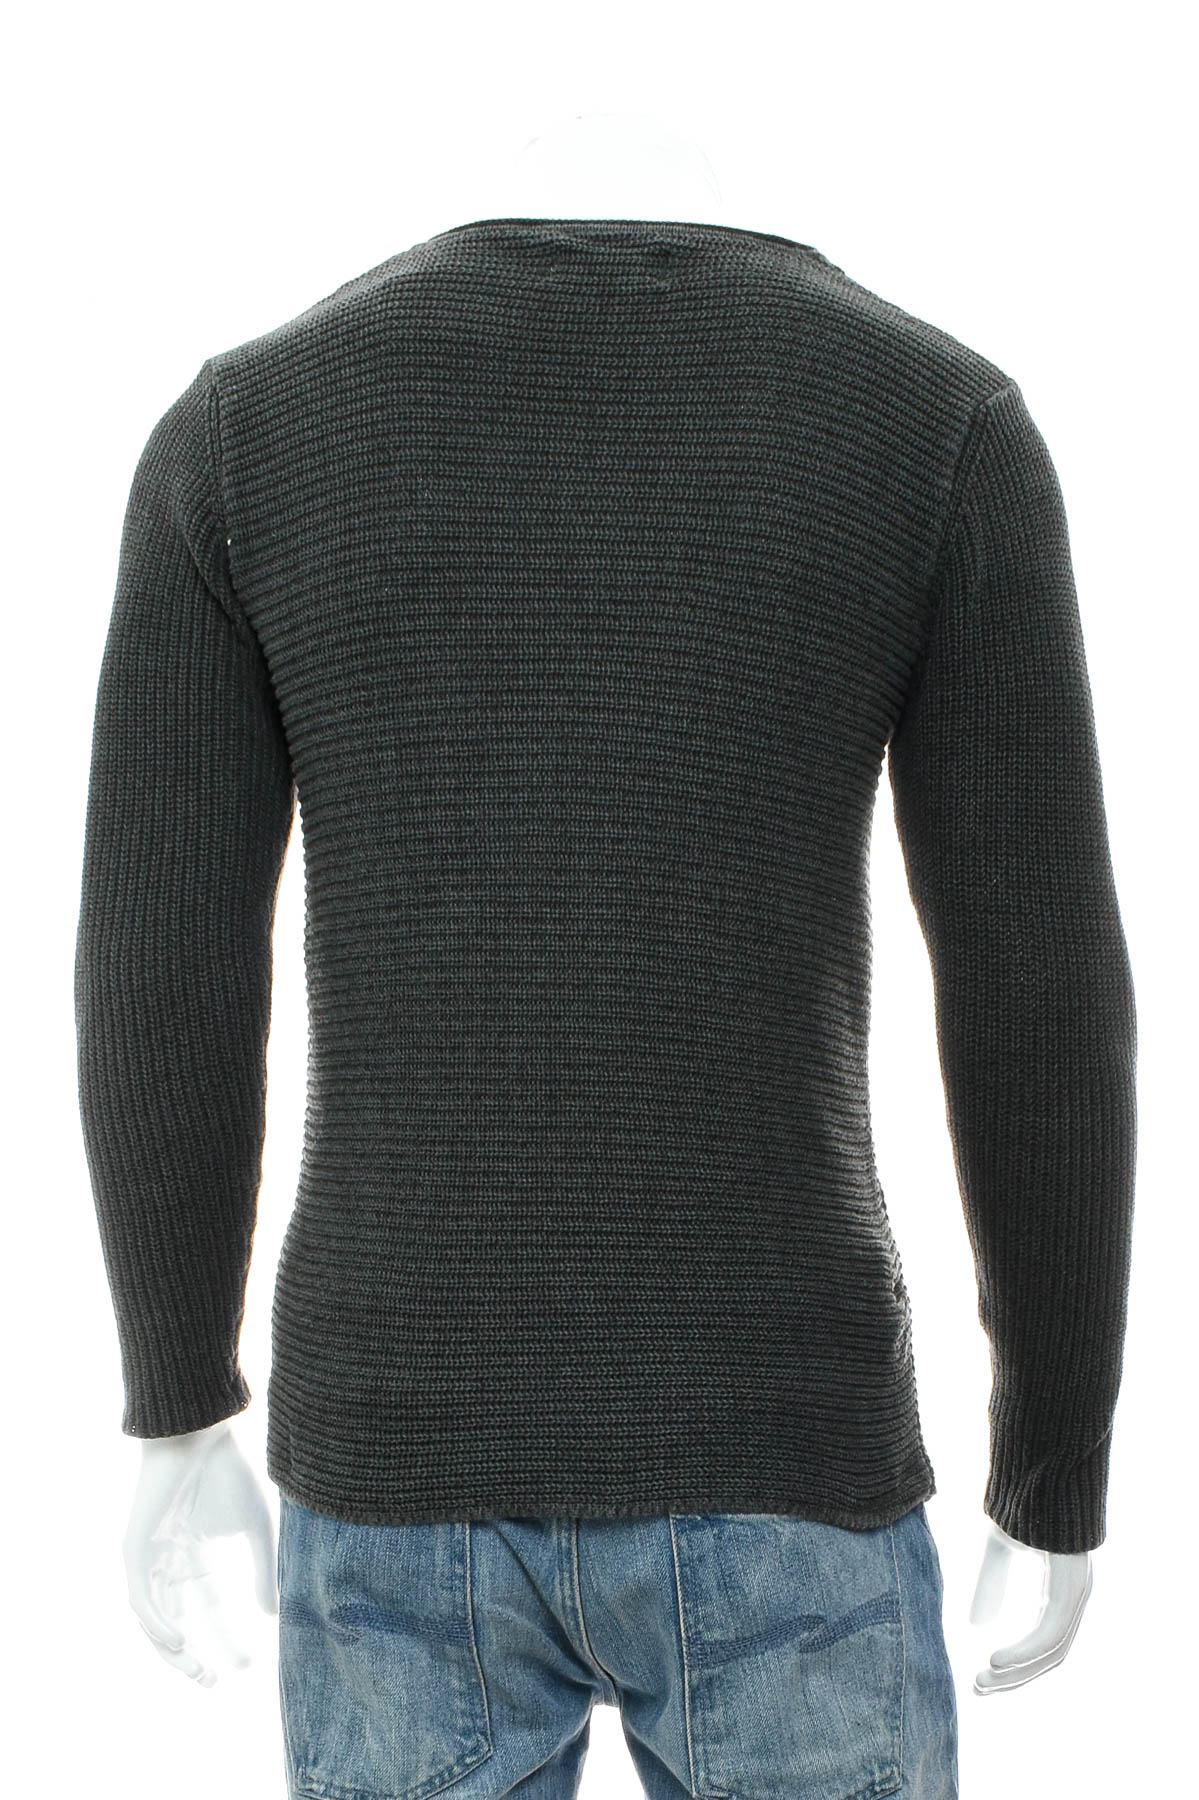 Men's sweater - ONLY & SONS - 1